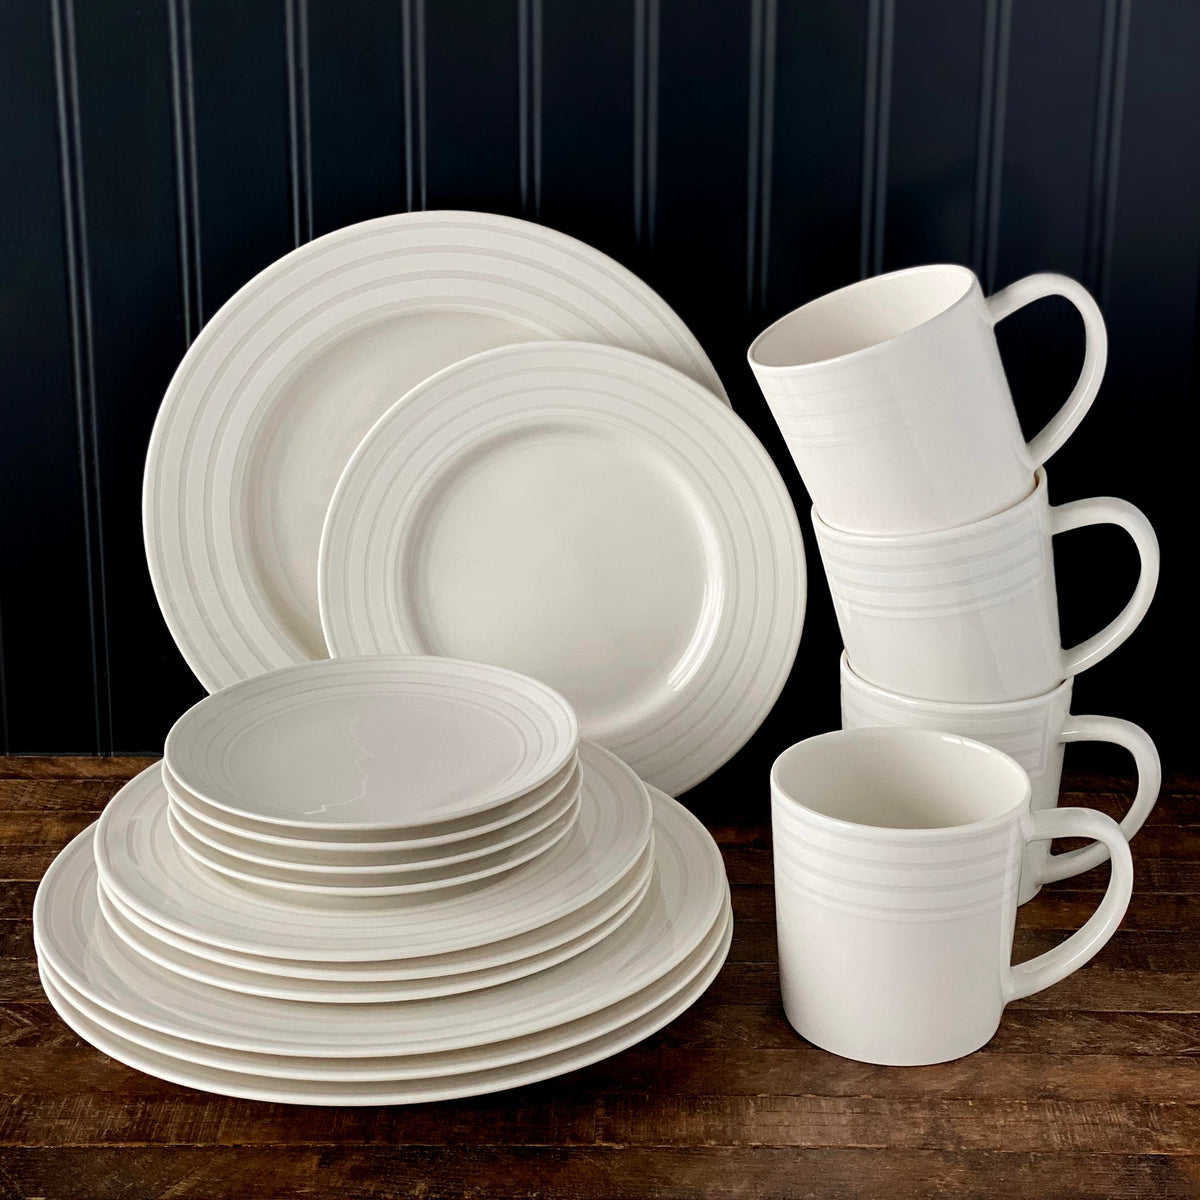 A set of Cambridge Stripe White Rimmed Dinner Plates by Caskata Artisanal Home on a wooden table.